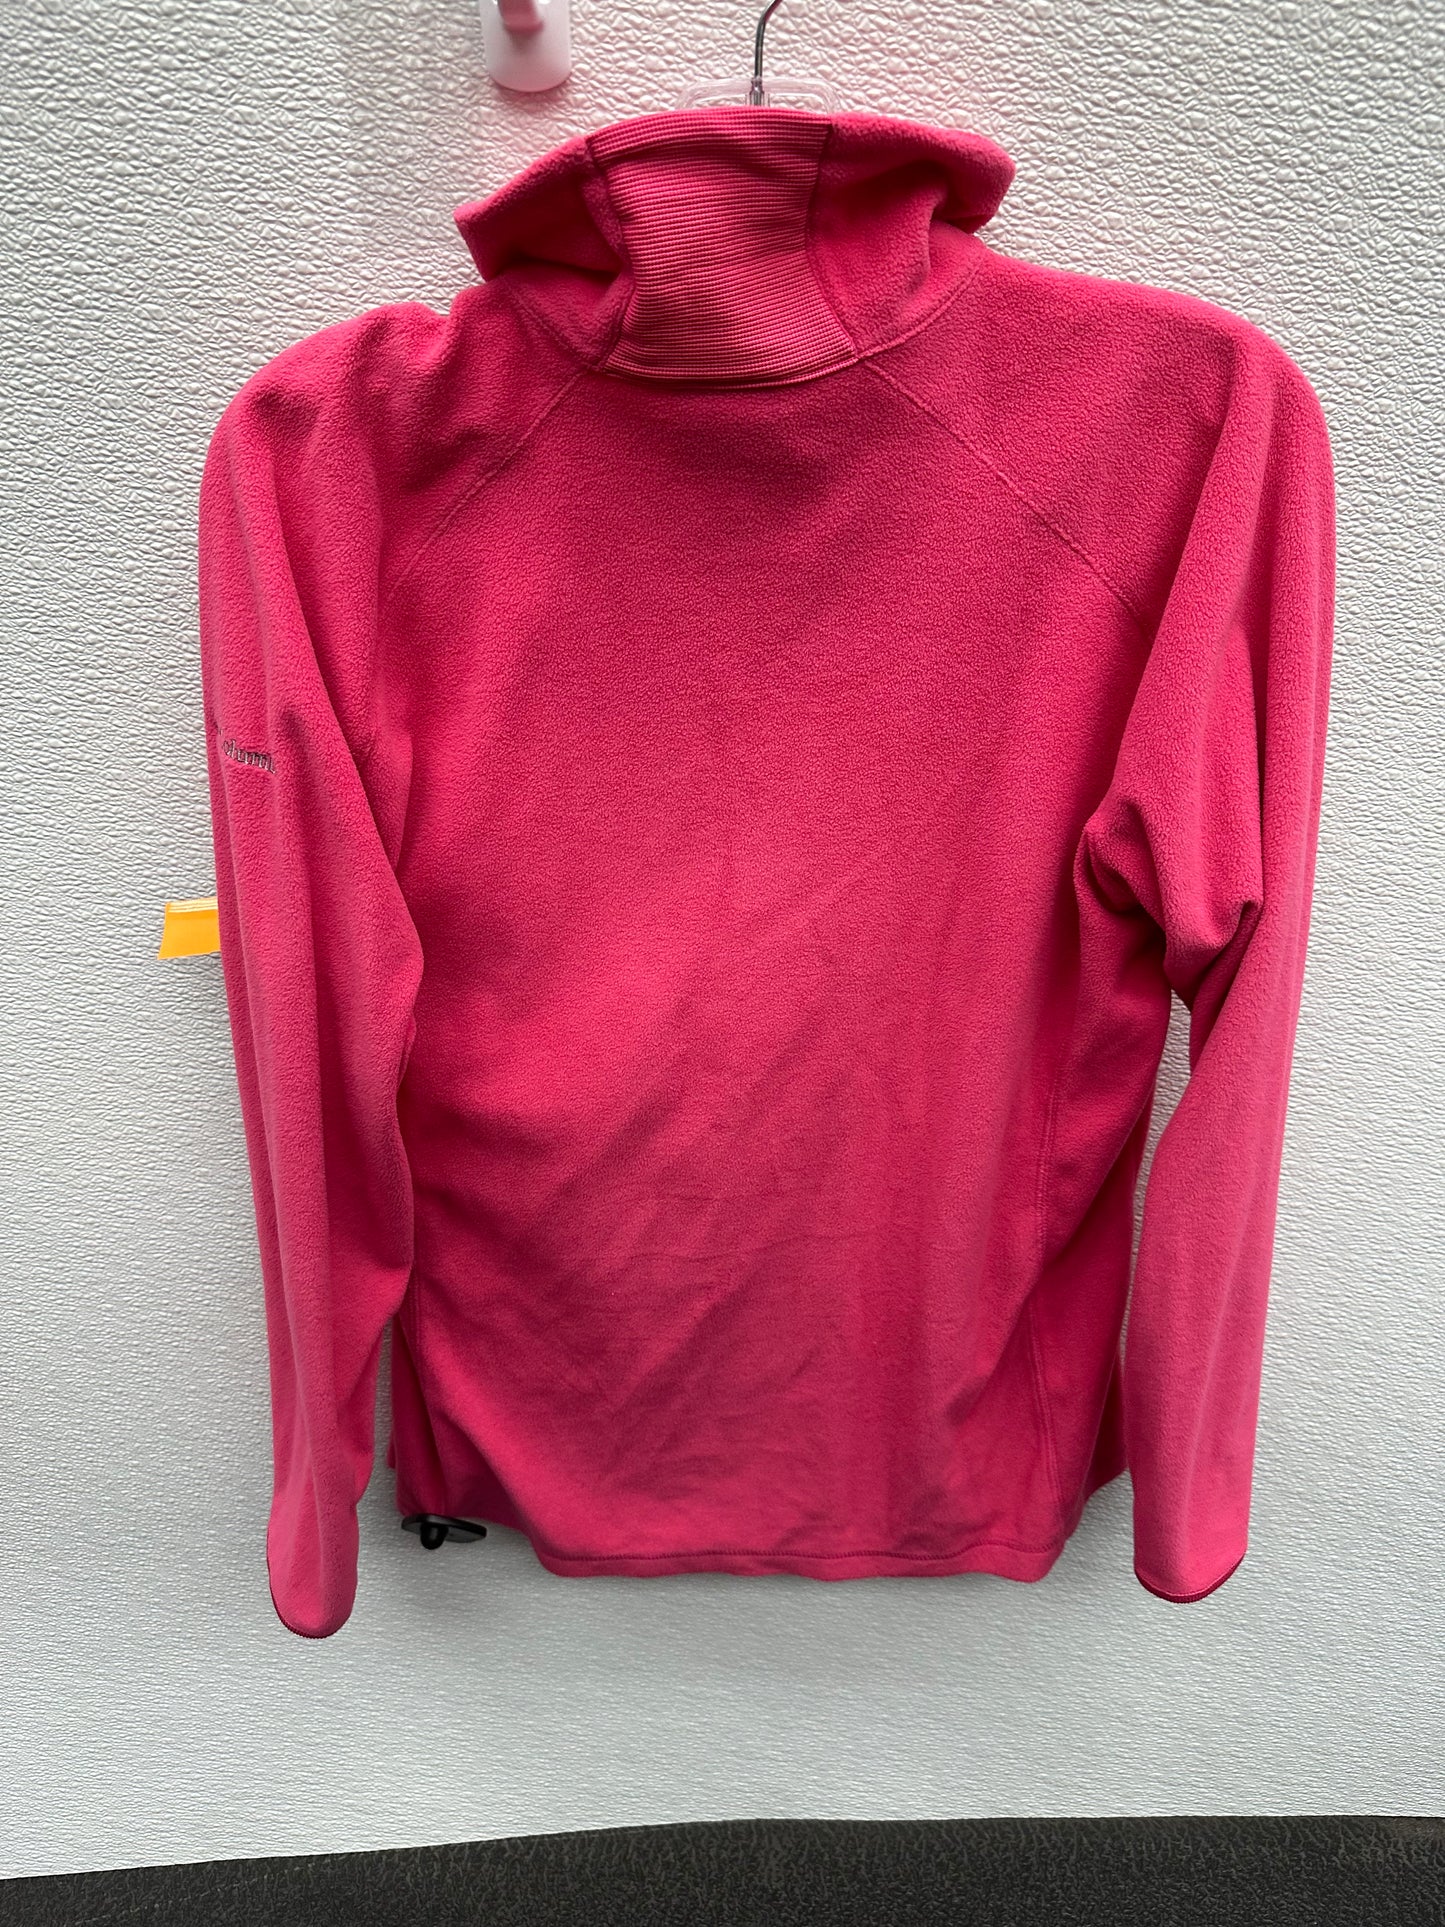 Top Long Sleeve Fleece Pullover By Columbia  Size: Xl